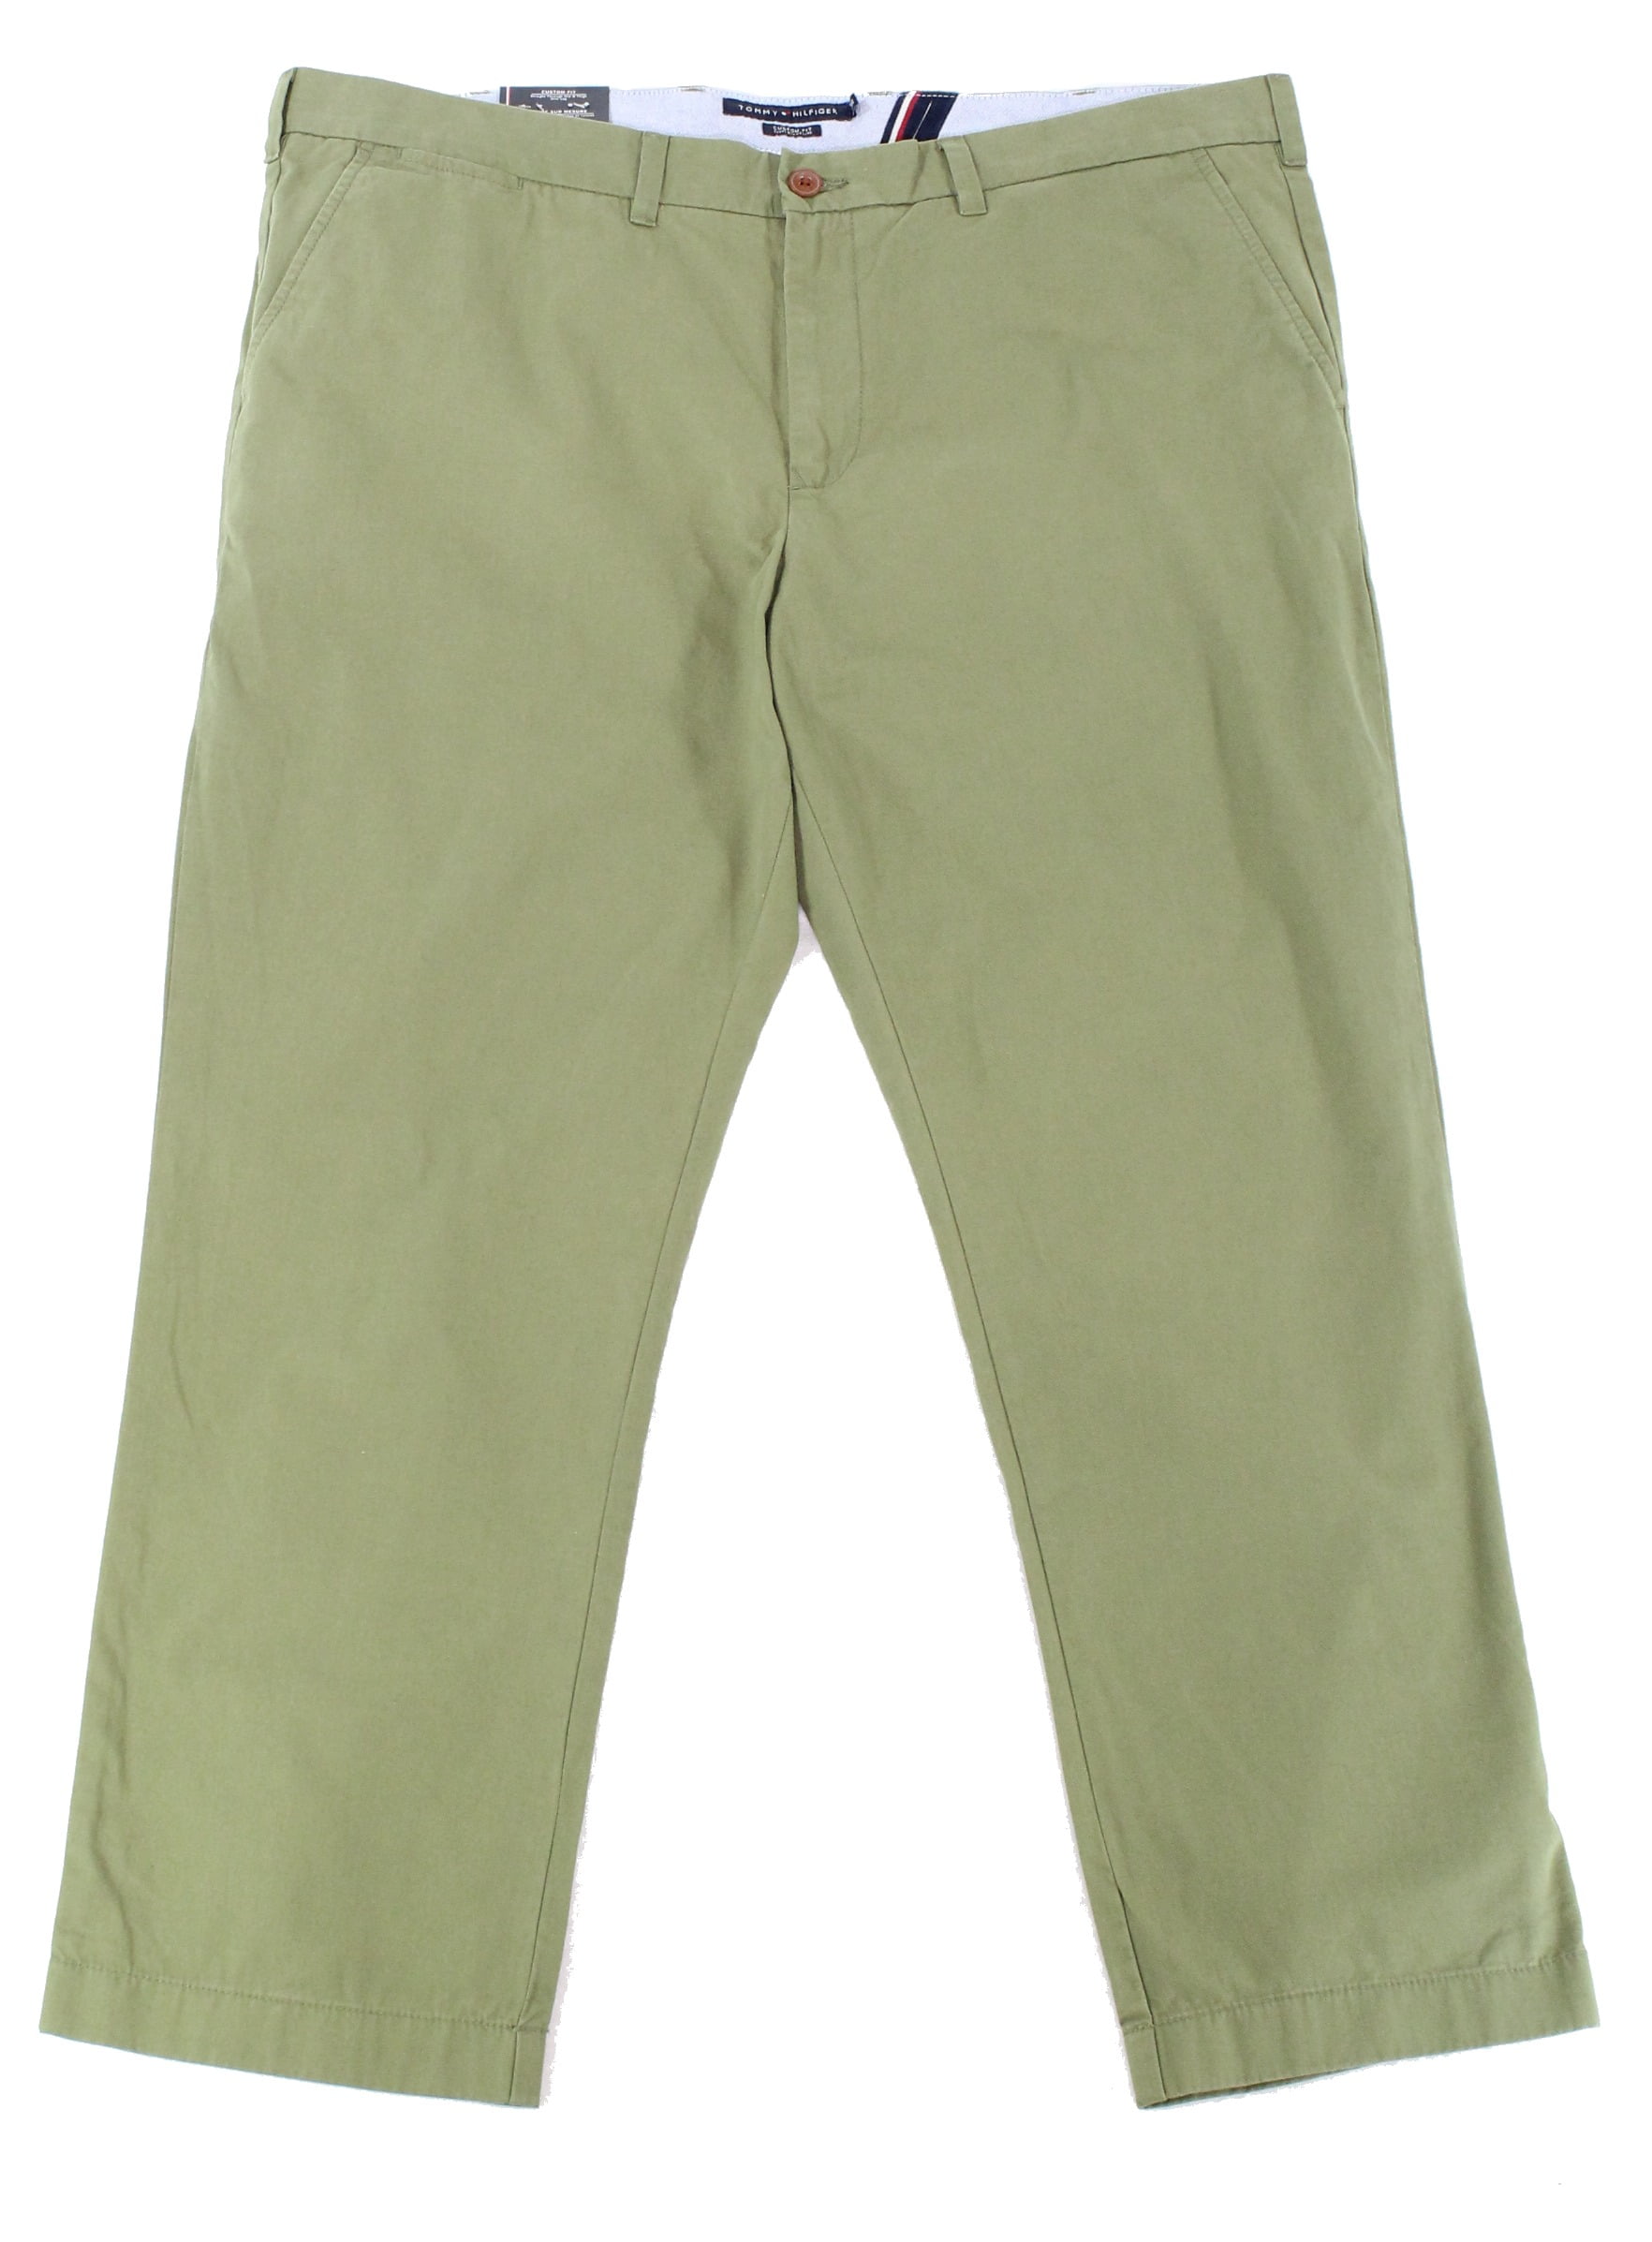 Tommy Hilfiger - Tommy Hilfiger NEW Green Mens Size 36x34 Khakis Chinos ...